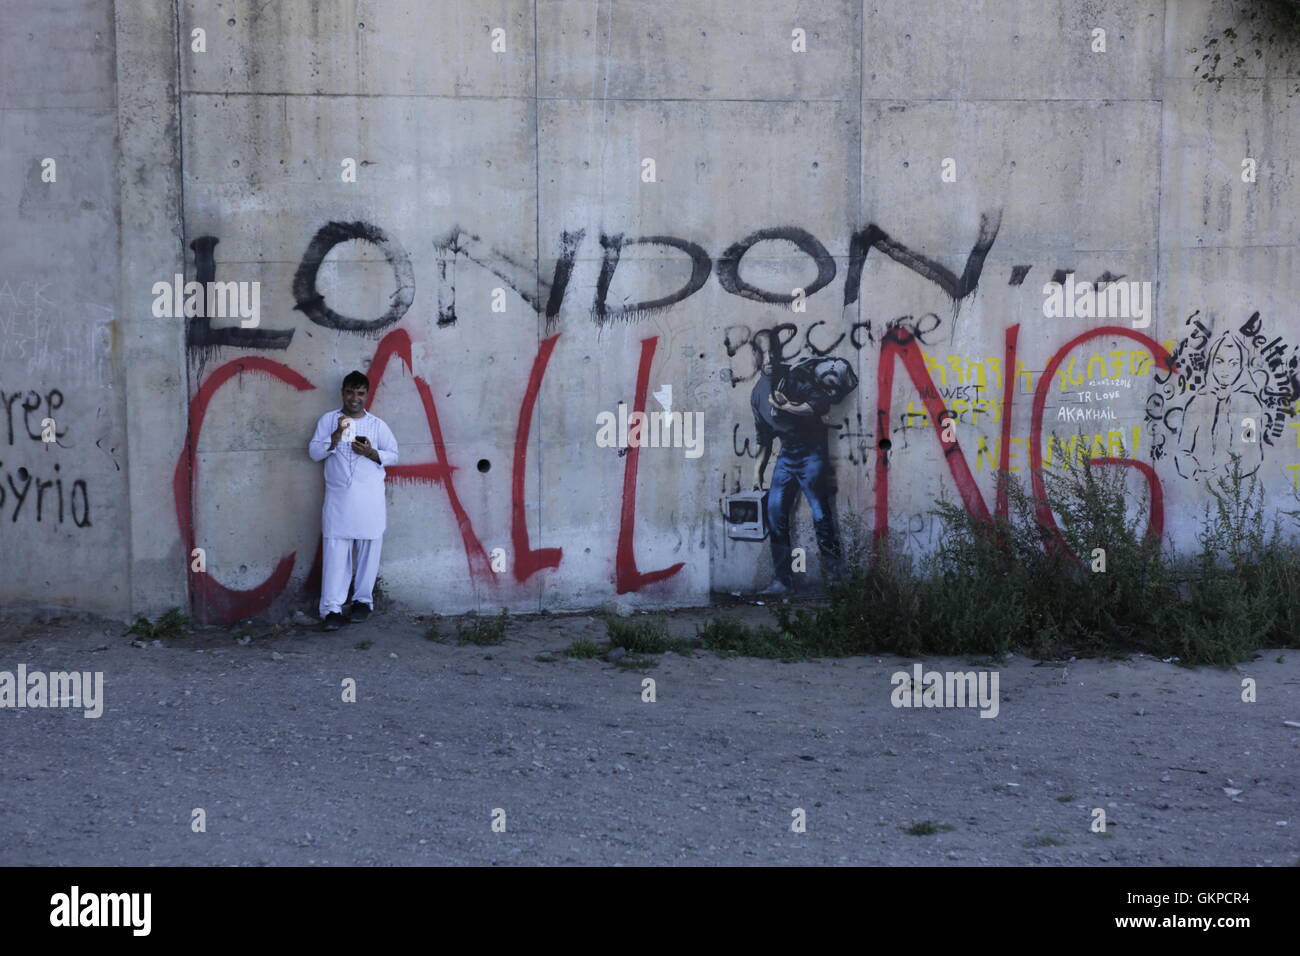 Calais, France. 22nd August 2016. A refugee stands in front of a  graffiti of Apple's Steve Jobs, depicted as a refugee (in allusion to his father, who was a refugee from Syria) that has been painted by Banksy near the entrance of the Jungle.  Over 9,000 refugees live in the Refugee camp in Calais, called the Jungle. They are all on their way to the UK and are stranded here, as the English Channel is heavily guarded with French and English police as well as high fences and barbed wire. Credit:  Michael Debets/Alamy Live News Stock Photo